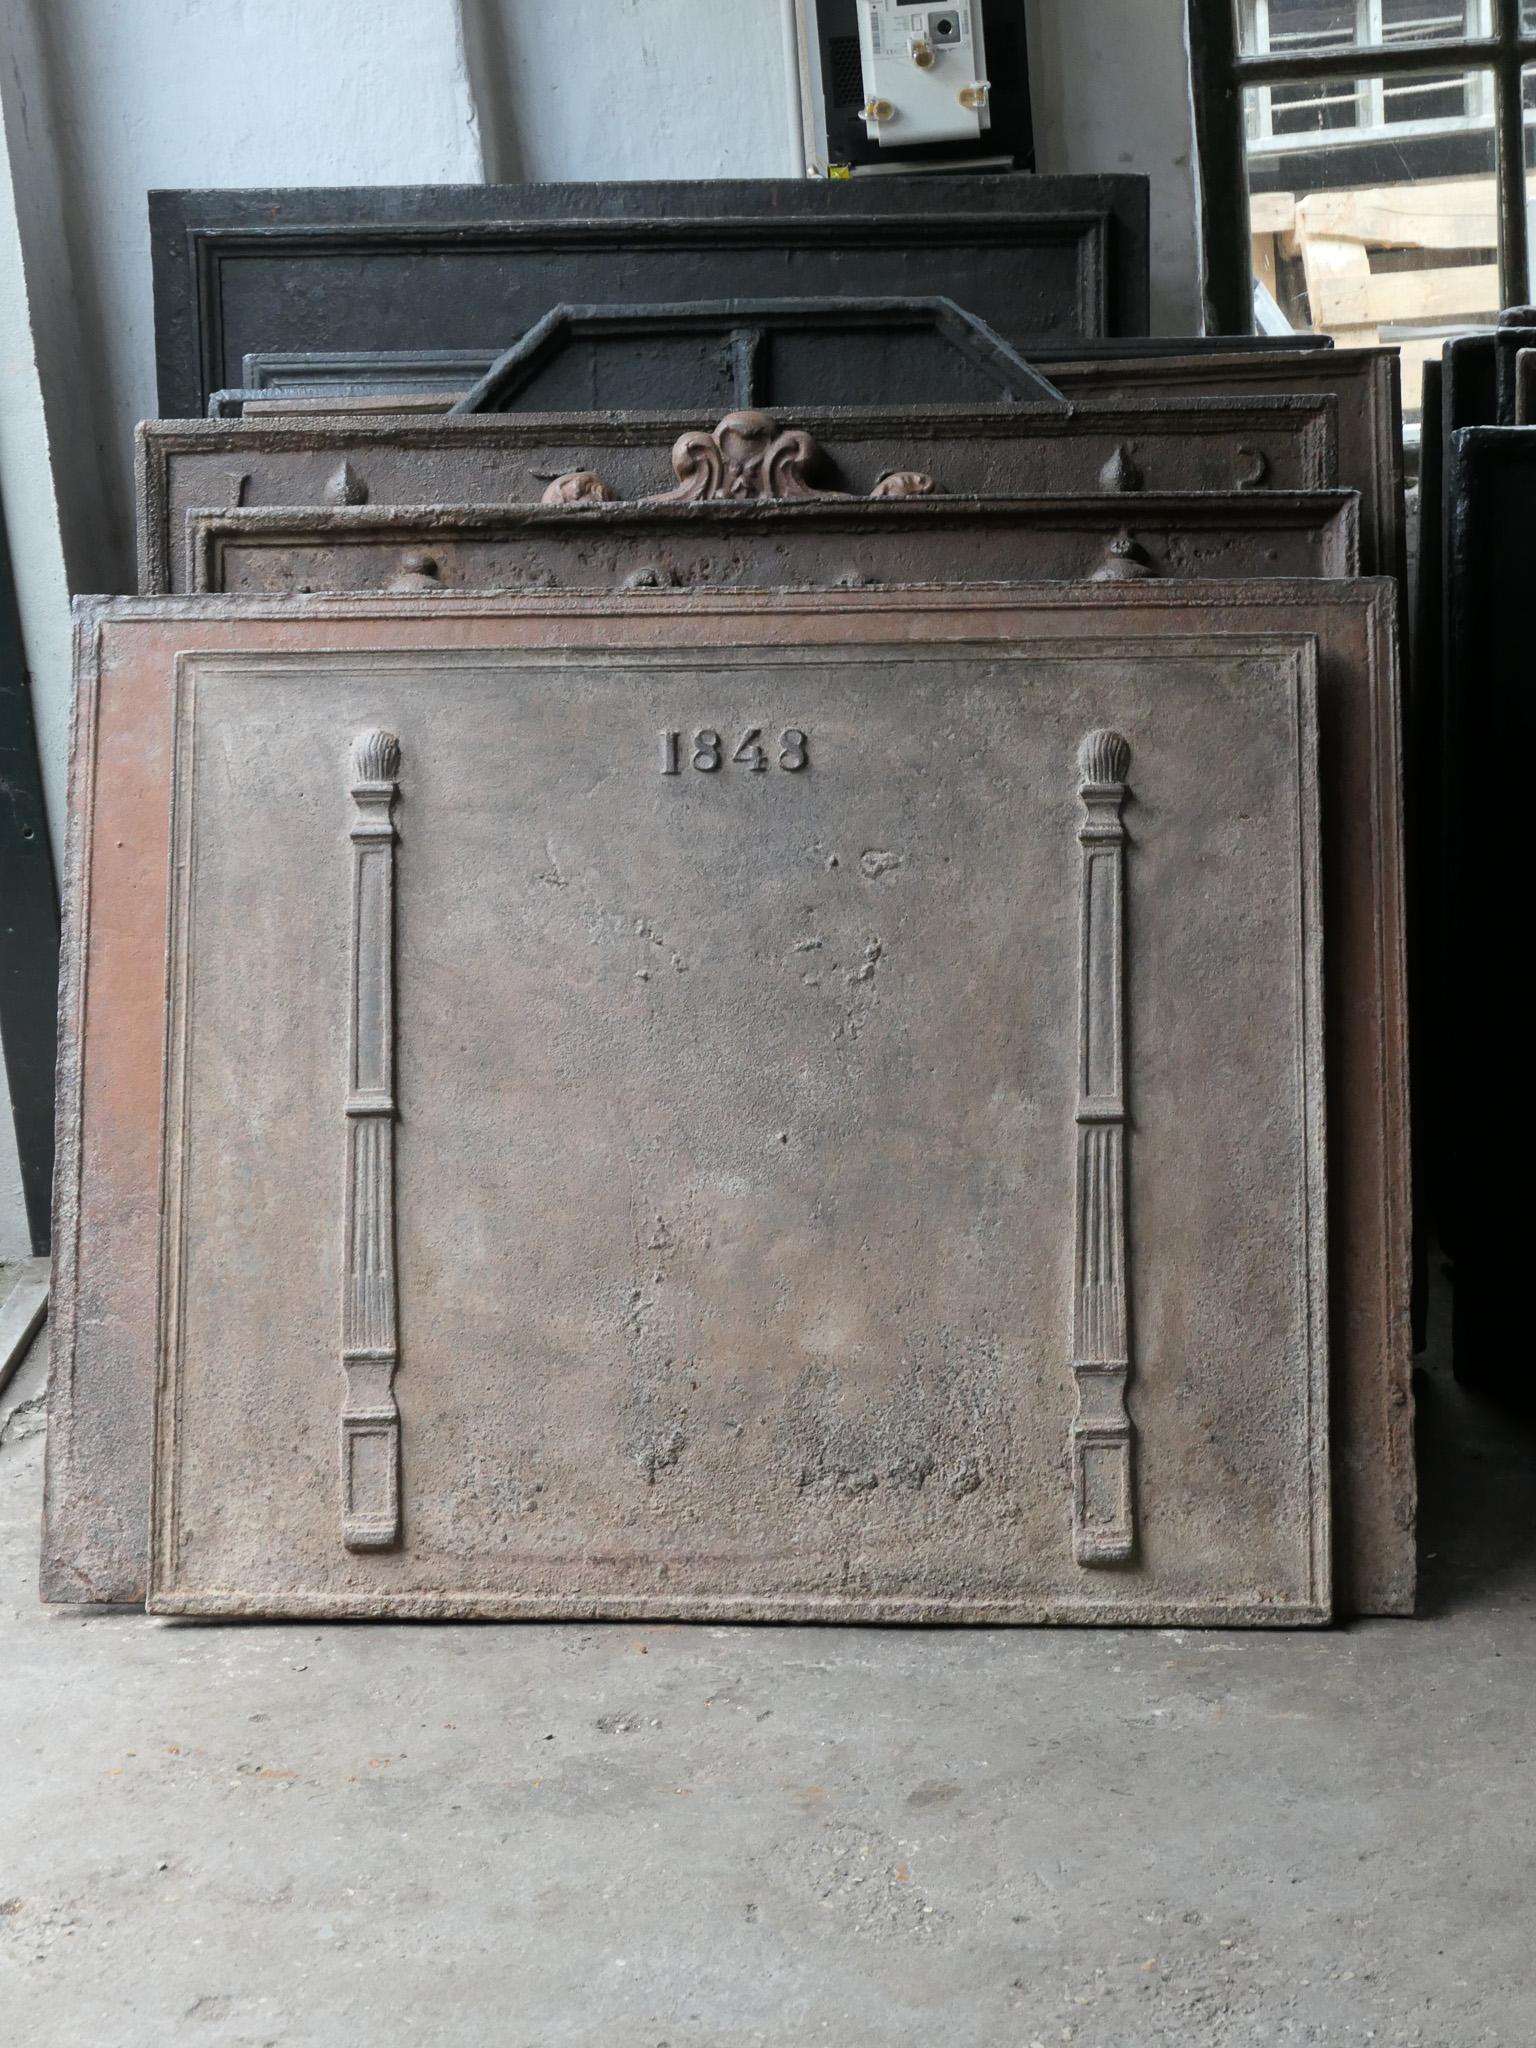 18th century French Louis Napoleon III fireback. The date of production, 1848, is cast in the fireback. The pillars refer to the club of Hercules and symbolize strength and the unknown.

The fireback is made of cast iron and has a natural brown